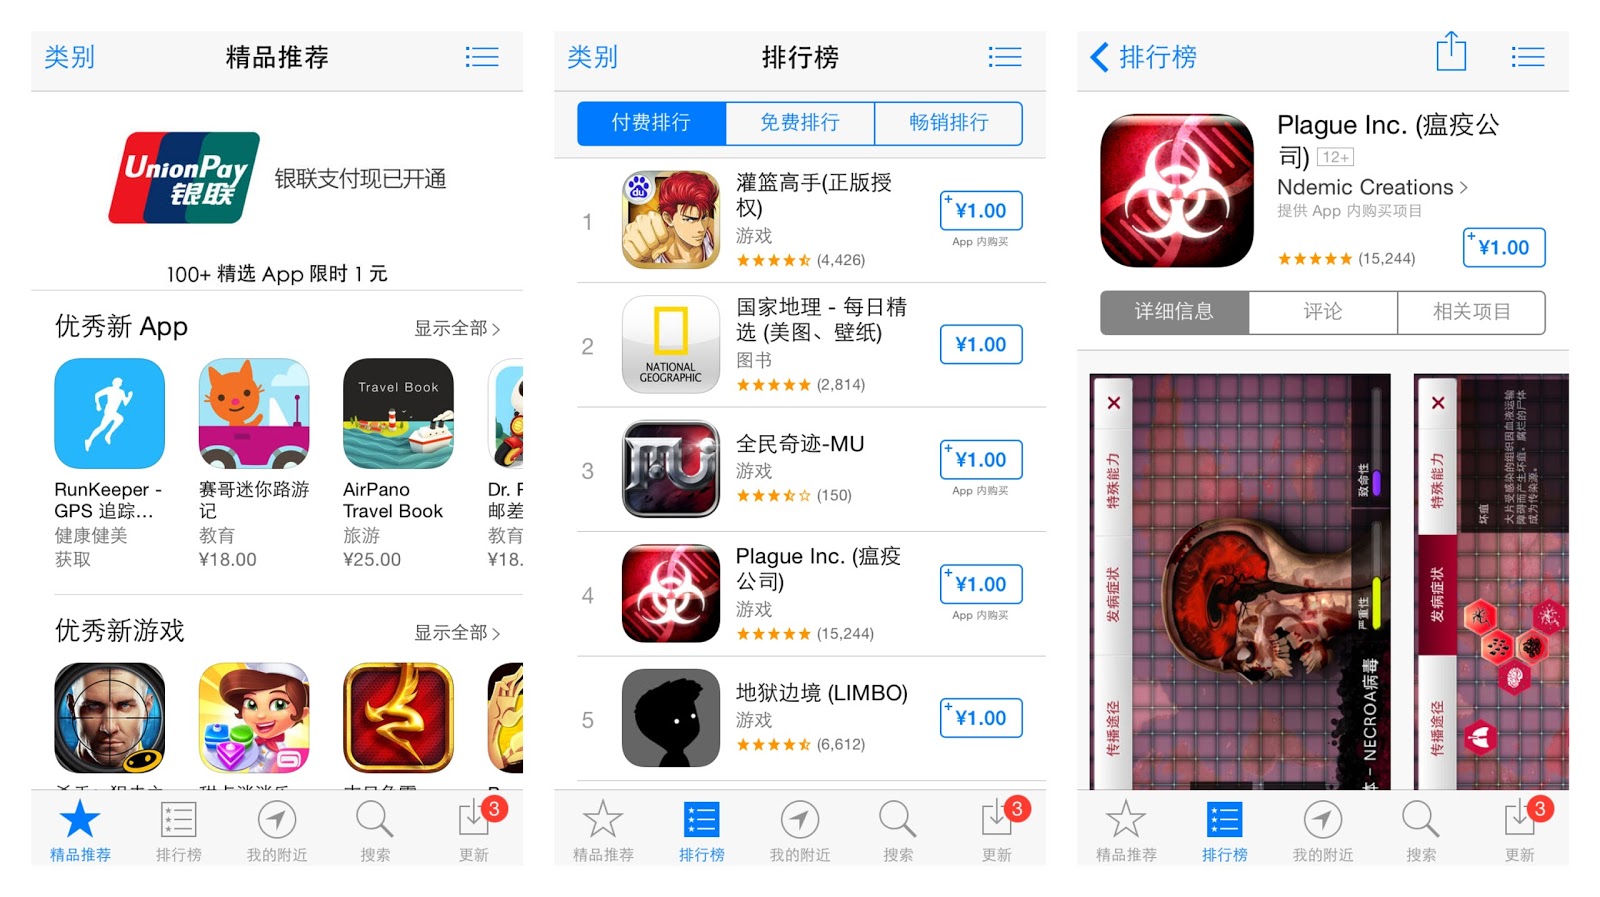 China iOS App Store New Pricing Tiers